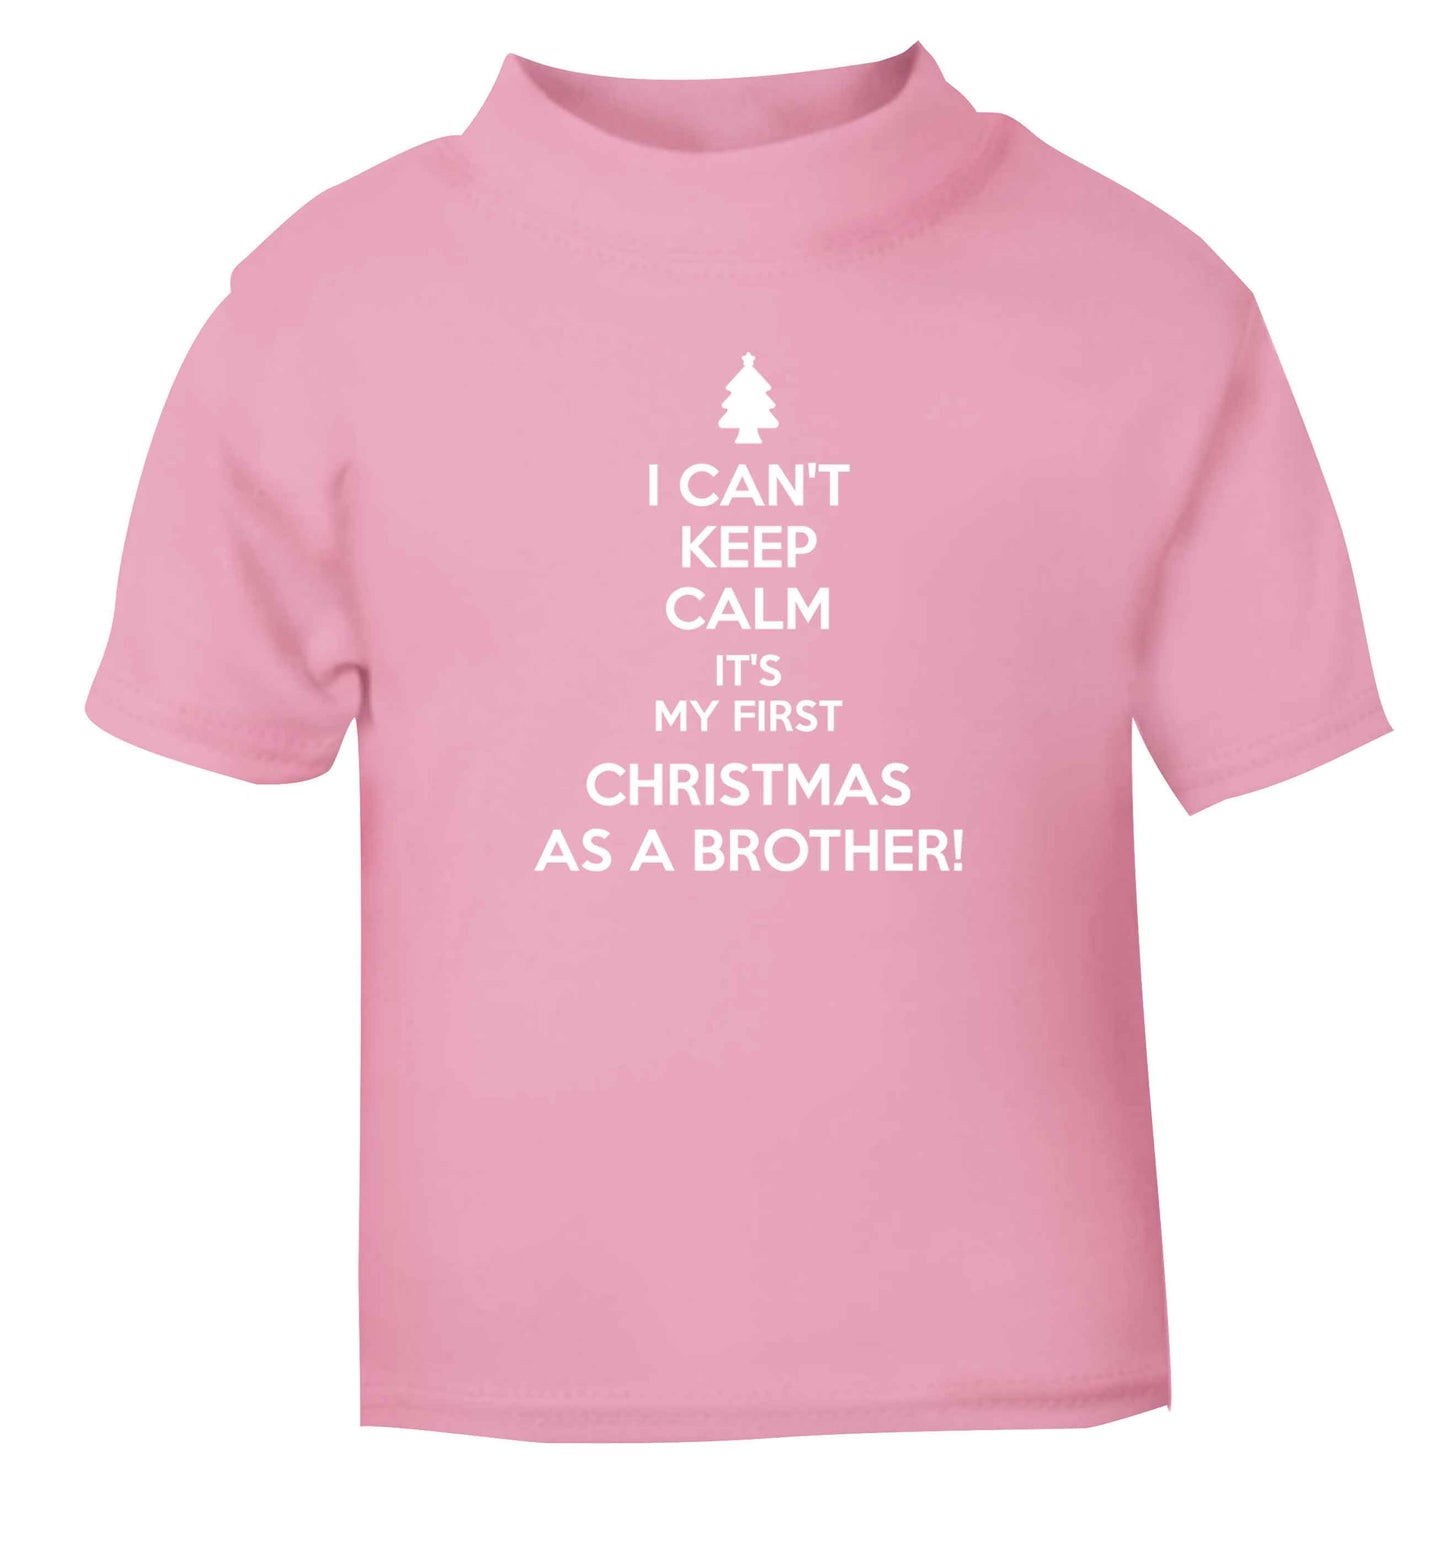 I can't keep calm it's my first Christmas as a brother! light pink Baby Toddler Tshirt 2 Years